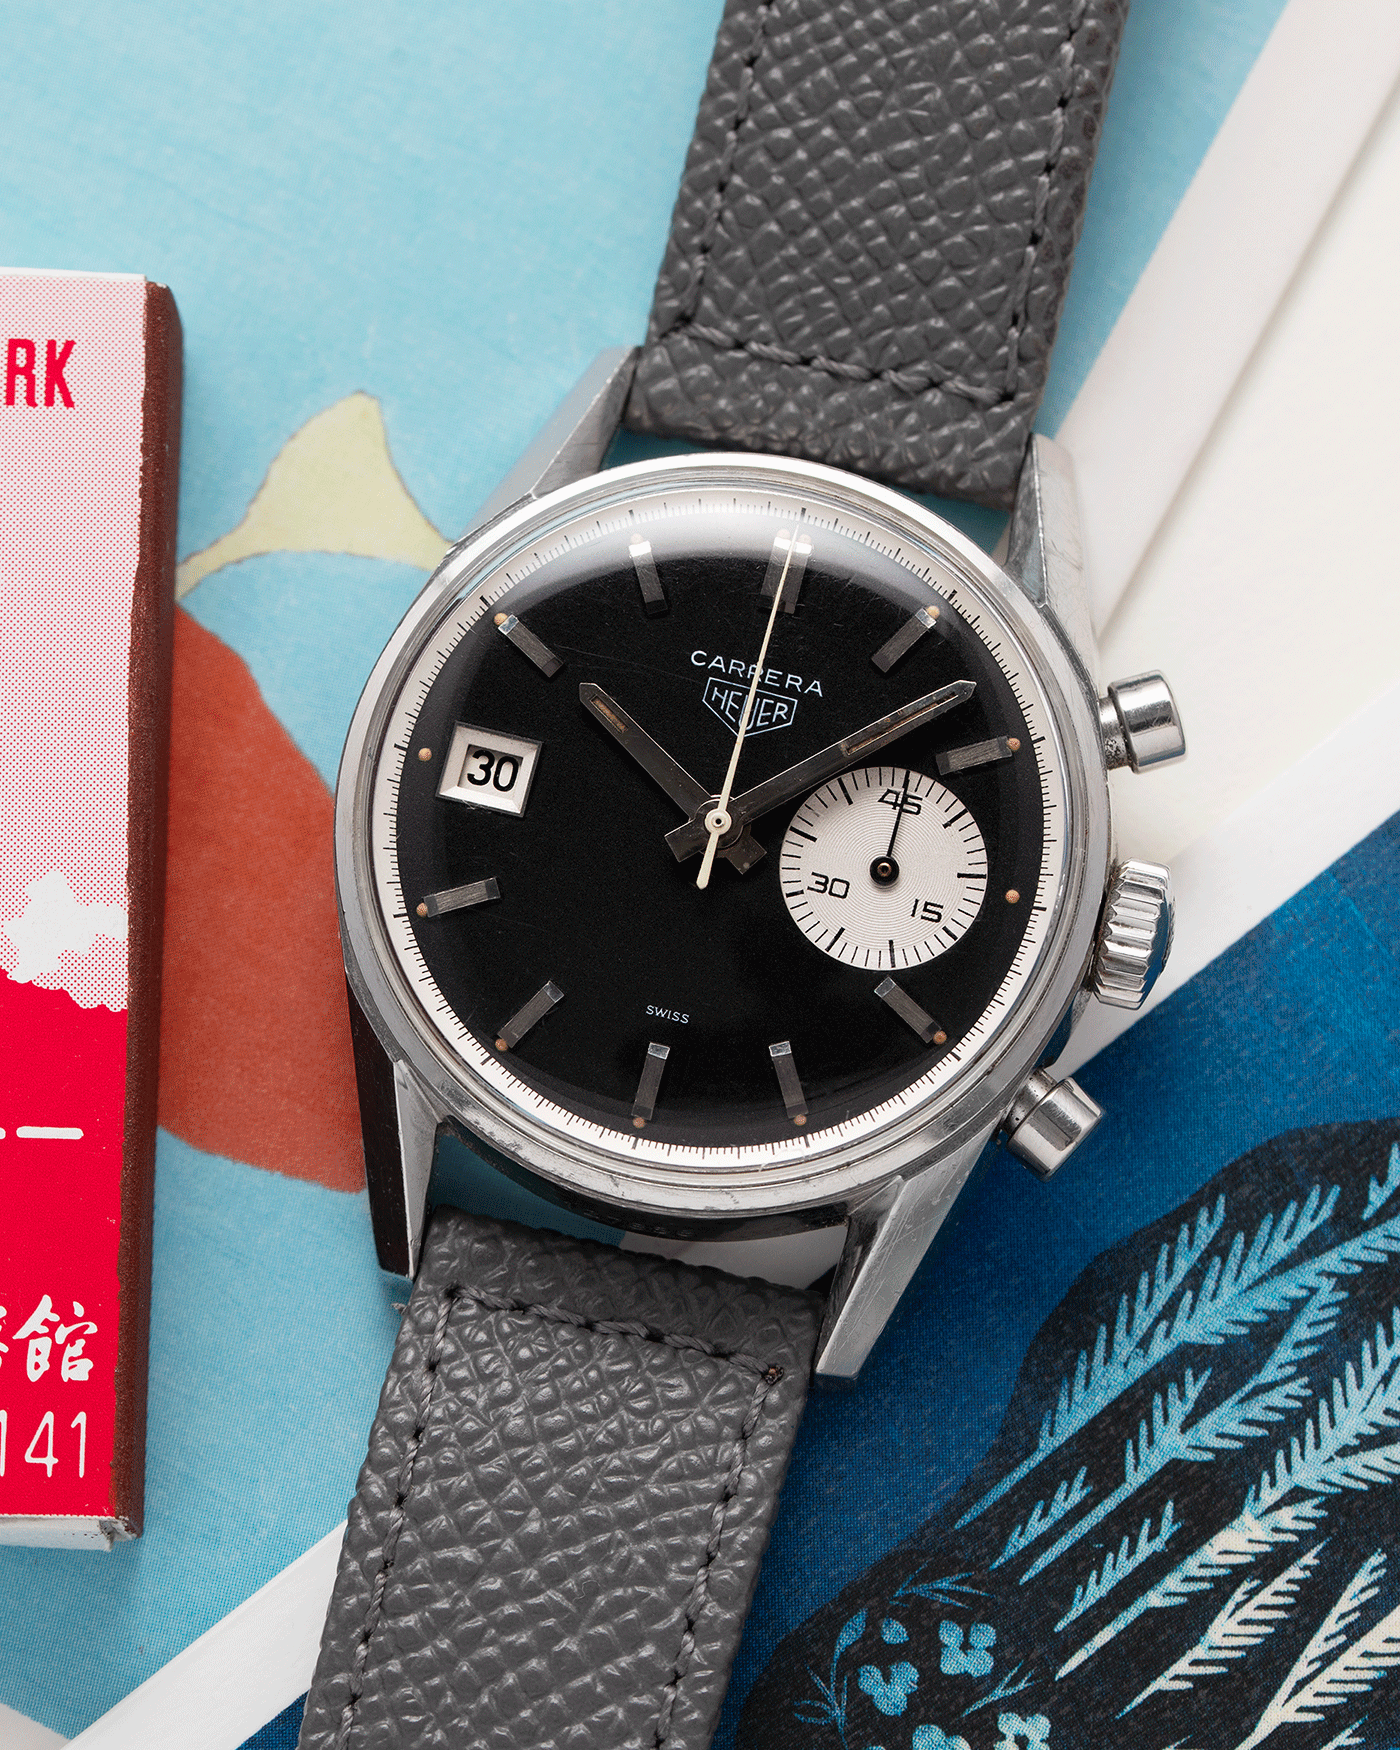 Brand: Heuer Year: 1960’s Model: Carrera Reference Number: Dato 45 Ref. 3147N Material: Stainless Steel Movement: Landeron 189 Case Diameter: 35mm Lug Width: 18mm Bracelet/Strap: A Collected Man Grey Textured Calf Strap